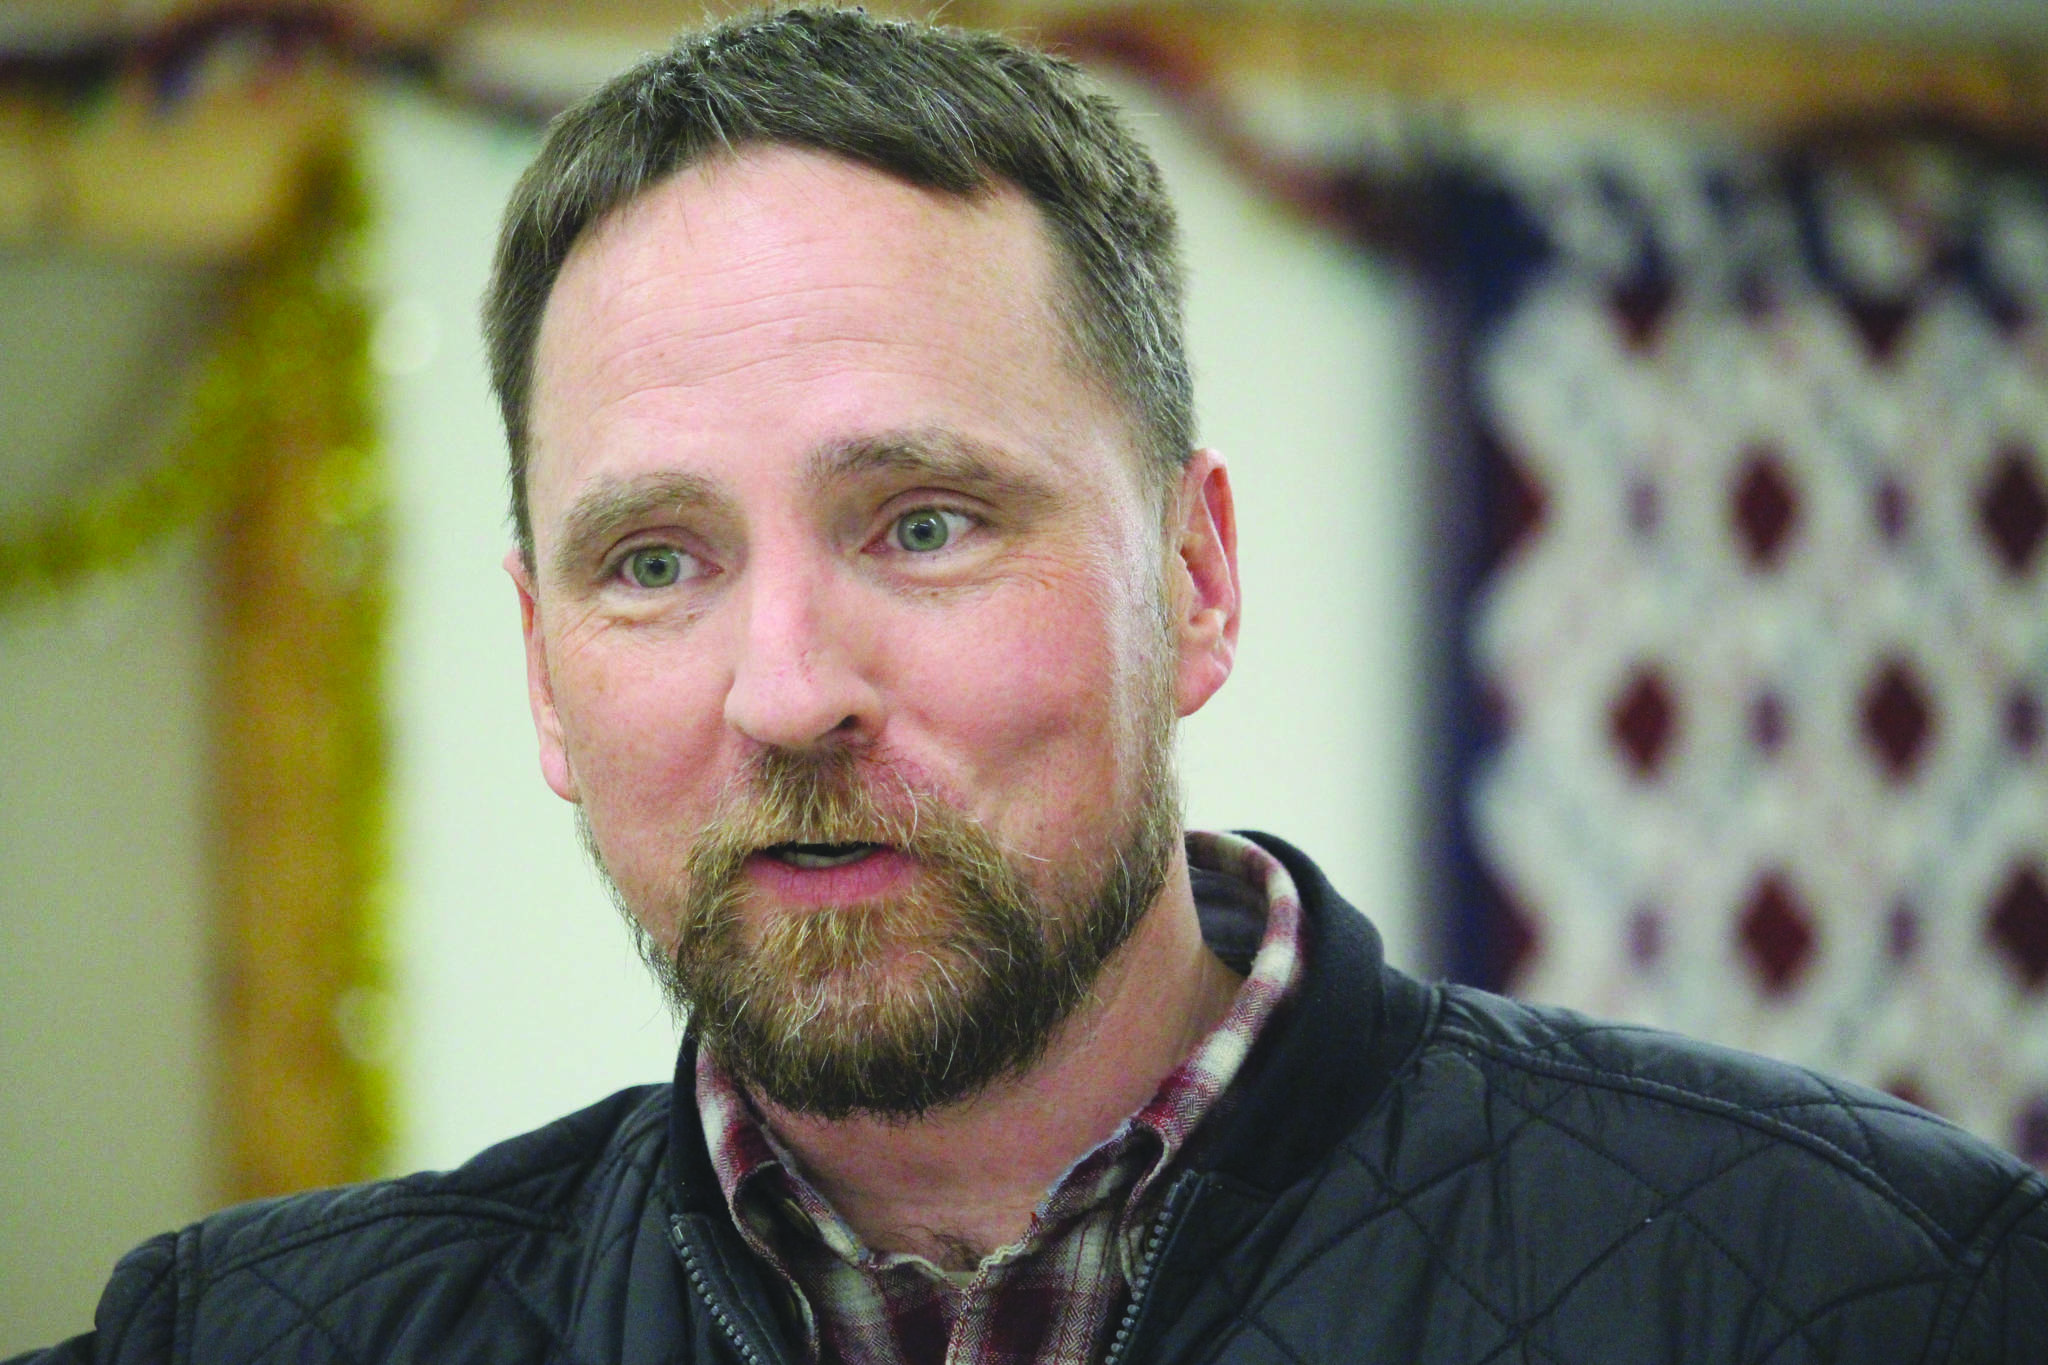 Rep. Ben Carpenter, R-Nikiski, speaks to constituents during a town hall at the Funny River Community Center in Funny River, Alaska in January 2020. (Photo by Brian Mazurek | Peninsula Clarion File)